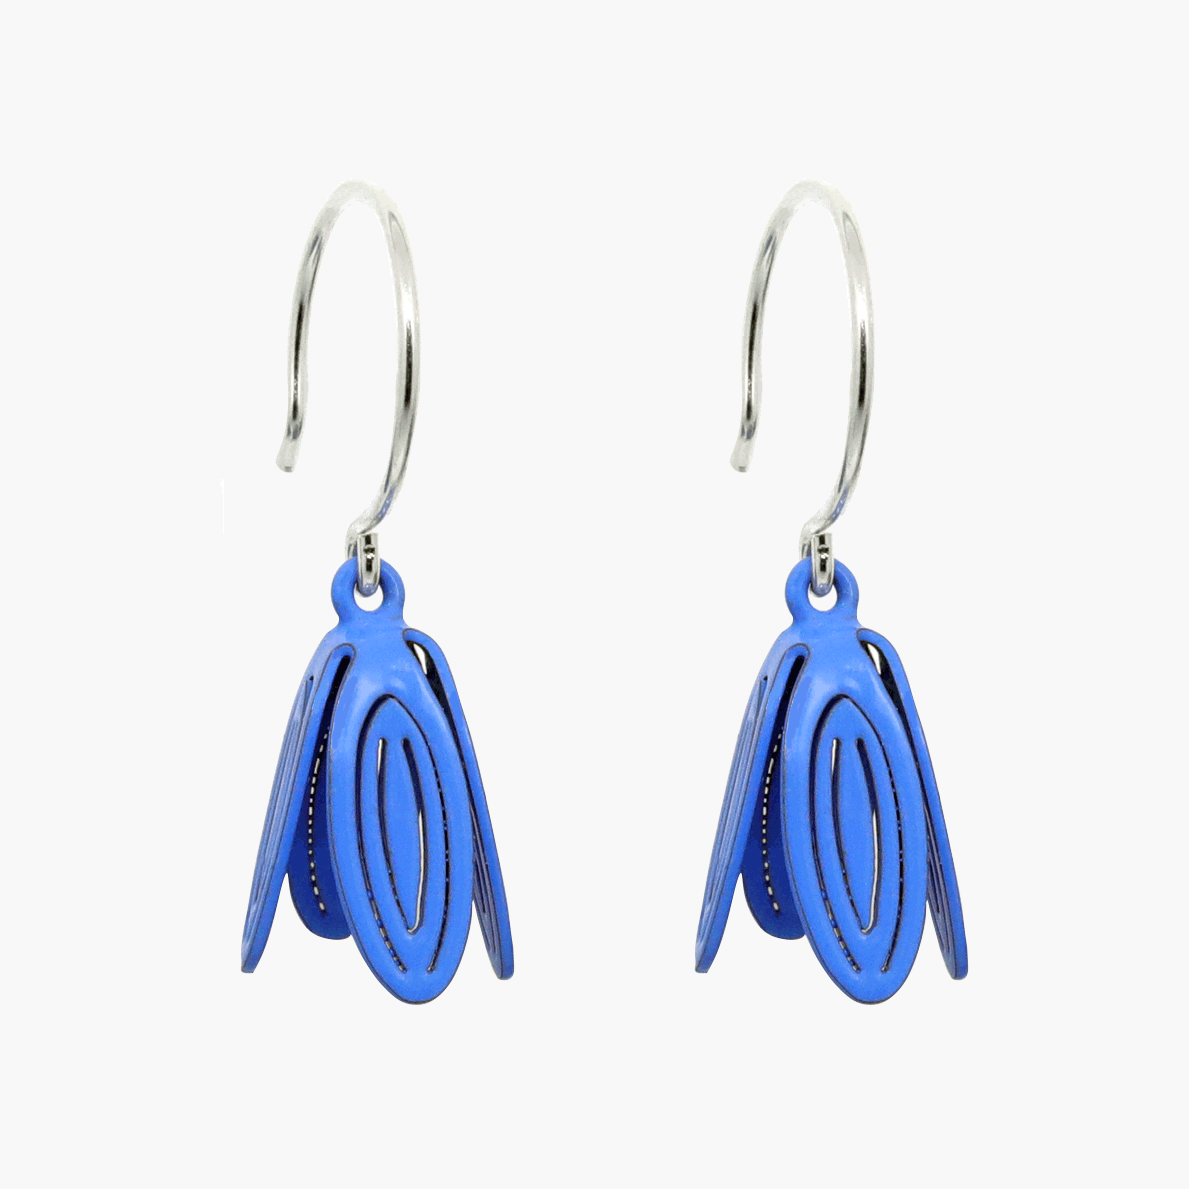 Spring-ready Petal Drop Earrings by Sorrel Van Allen: Classic petal shape in vibrant colors, dangling gracefully from rounded hooks for subtle movement. Lightweight construction ensures comfortable all-day wear. Ideal for gifting!